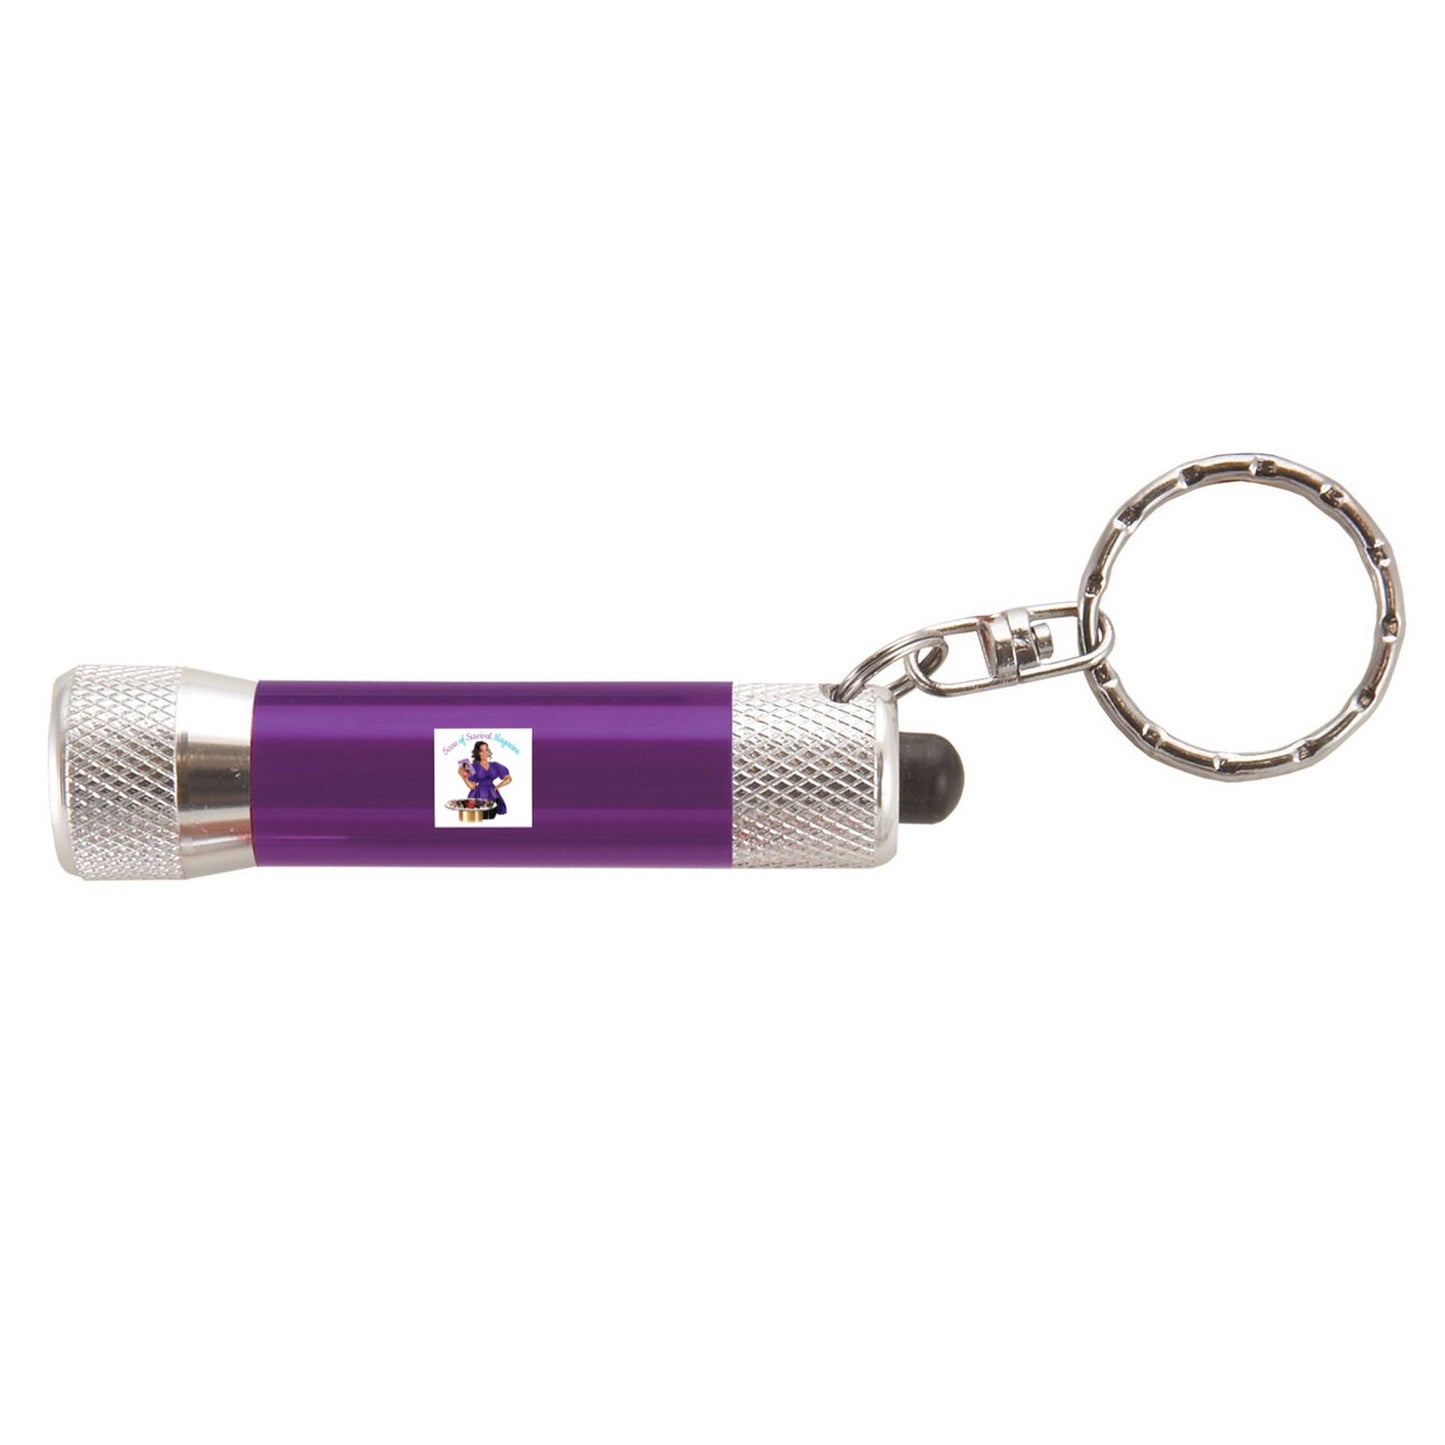 Our handy chroma led flashlight keyring Batteries included